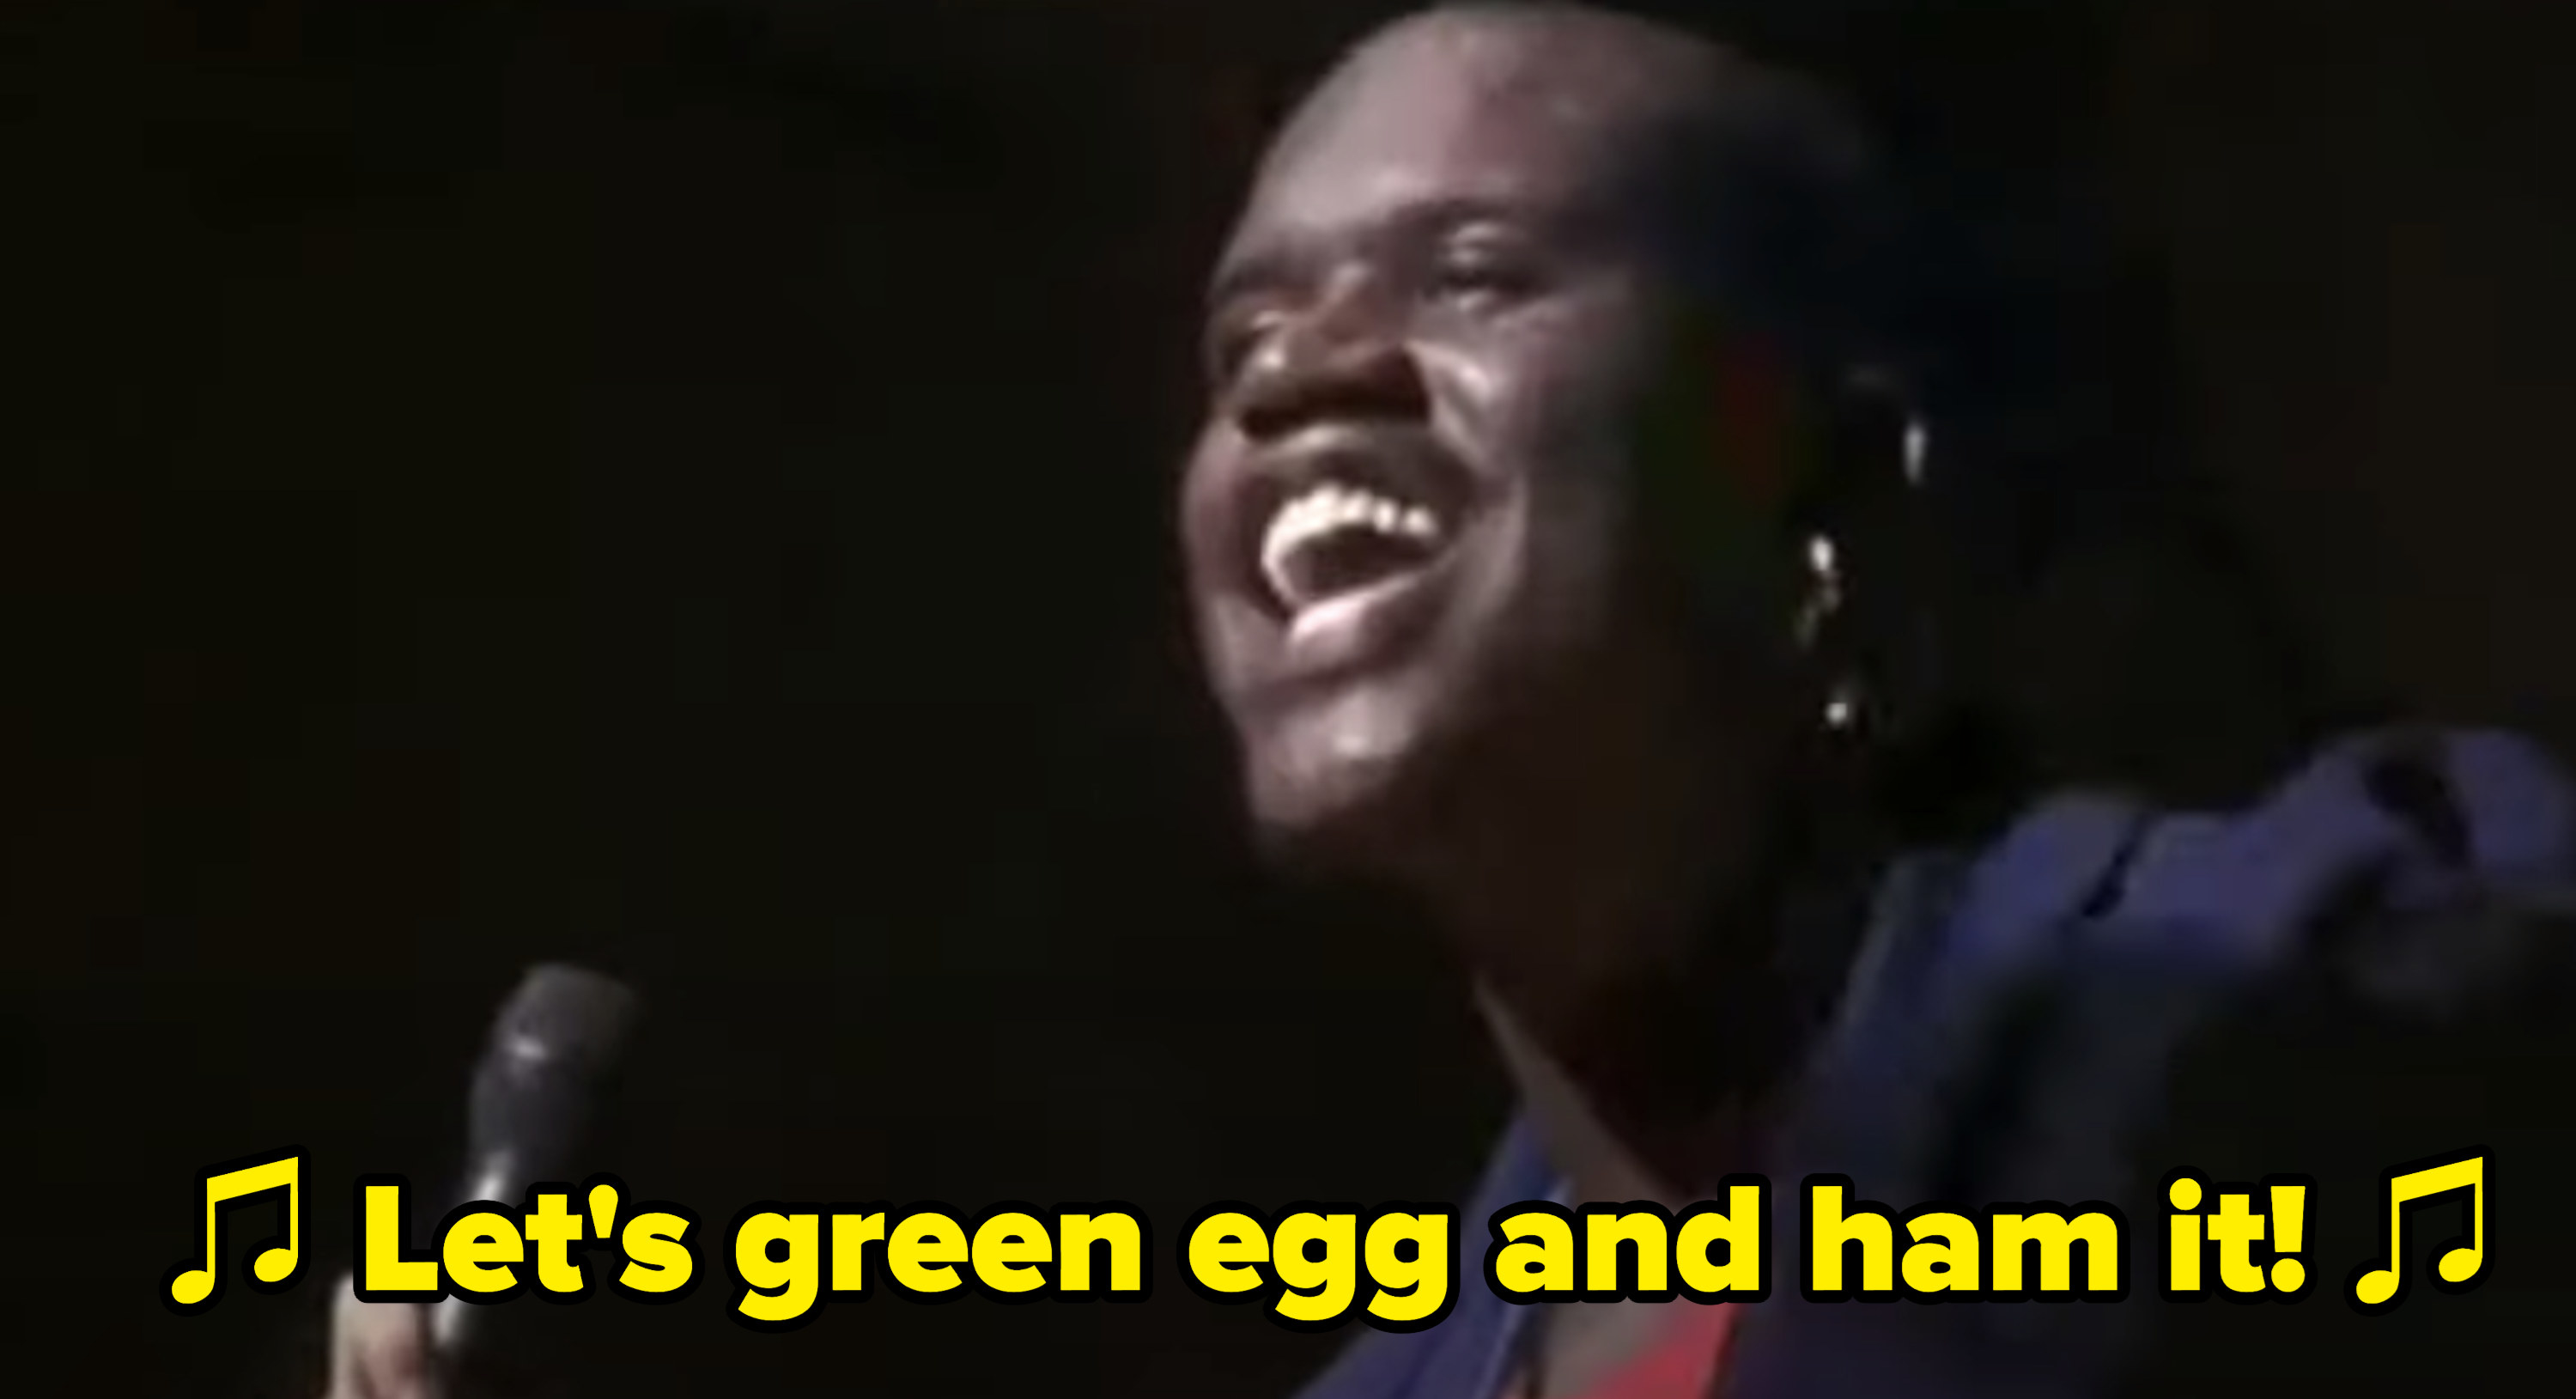 Kazaam rapping: &quot;Let&#x27;s green egg and ham it&quot;
